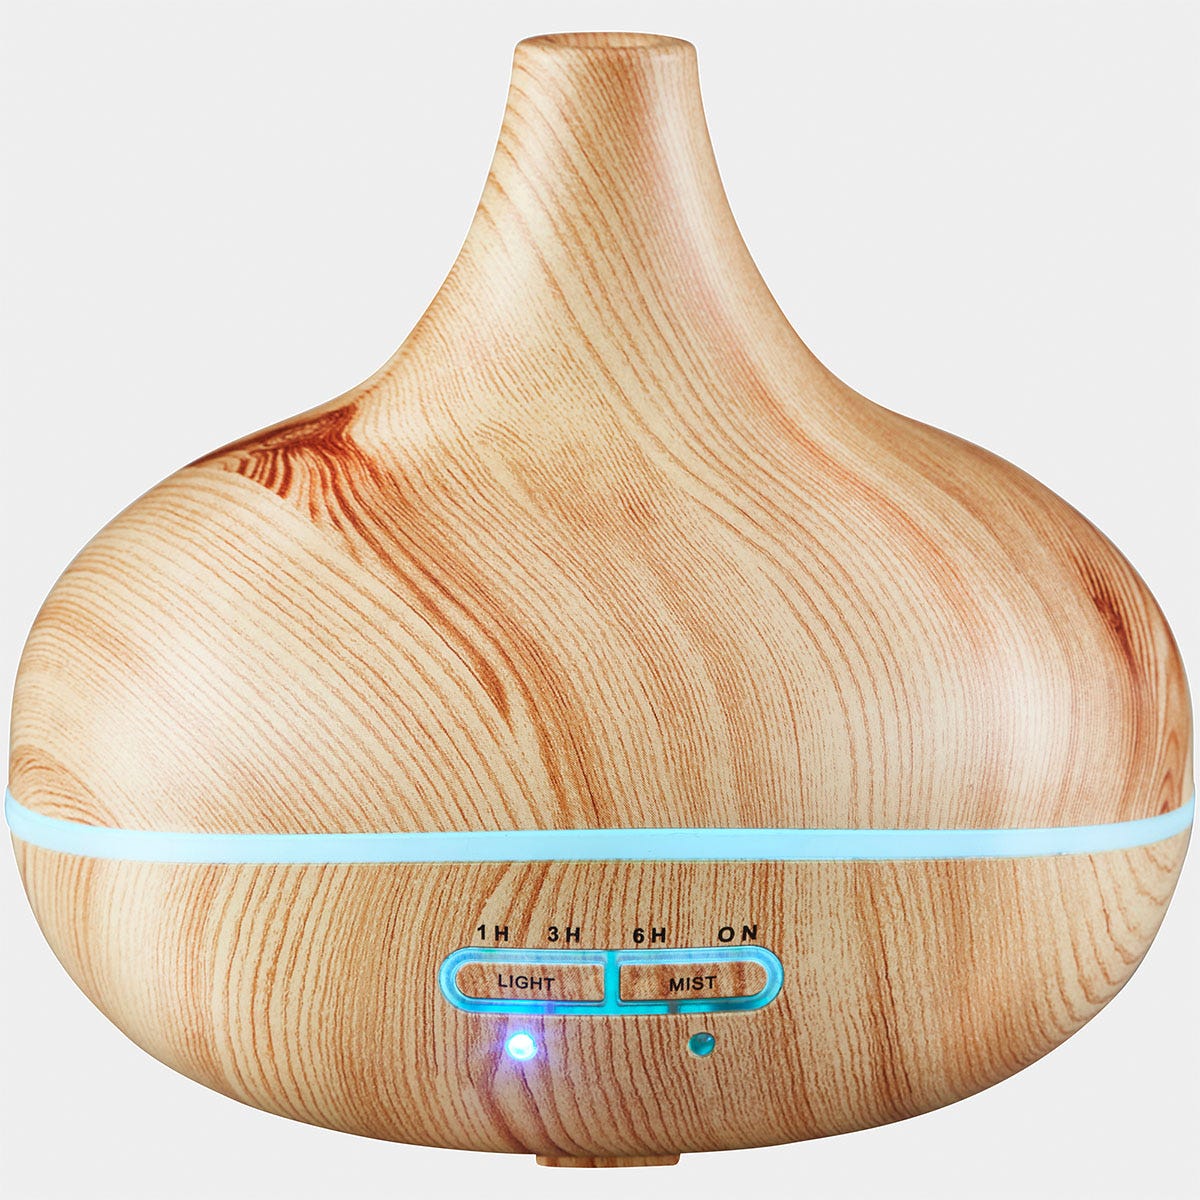 Cooks Professional Large Light Wooden Grain Aroma Diffuser